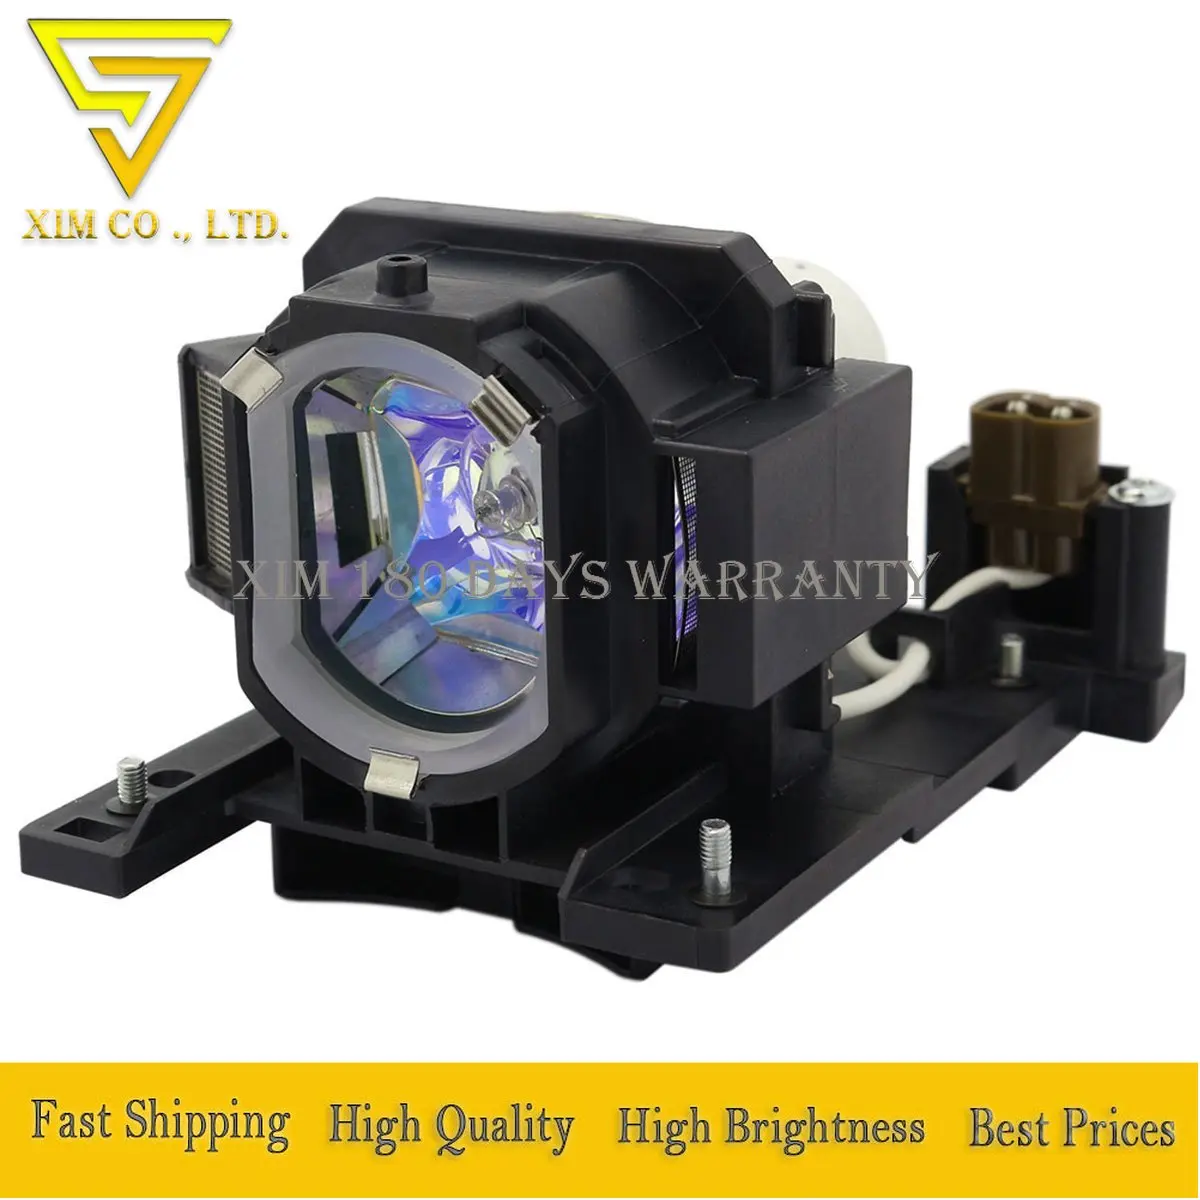 high quality DT01022 DT01026 Replacement Lamp with Housing for Hitachi CP-RX80W CP-RX78 ED-X24 CP-RX78W CP-RX80 projectors dt01026 dt01022 projector lamp for dukane 456 8755j 456 8755n 456 8787 456 8954h imagepro 8755j 8755k 8755n cp rx78 rx78w rx80